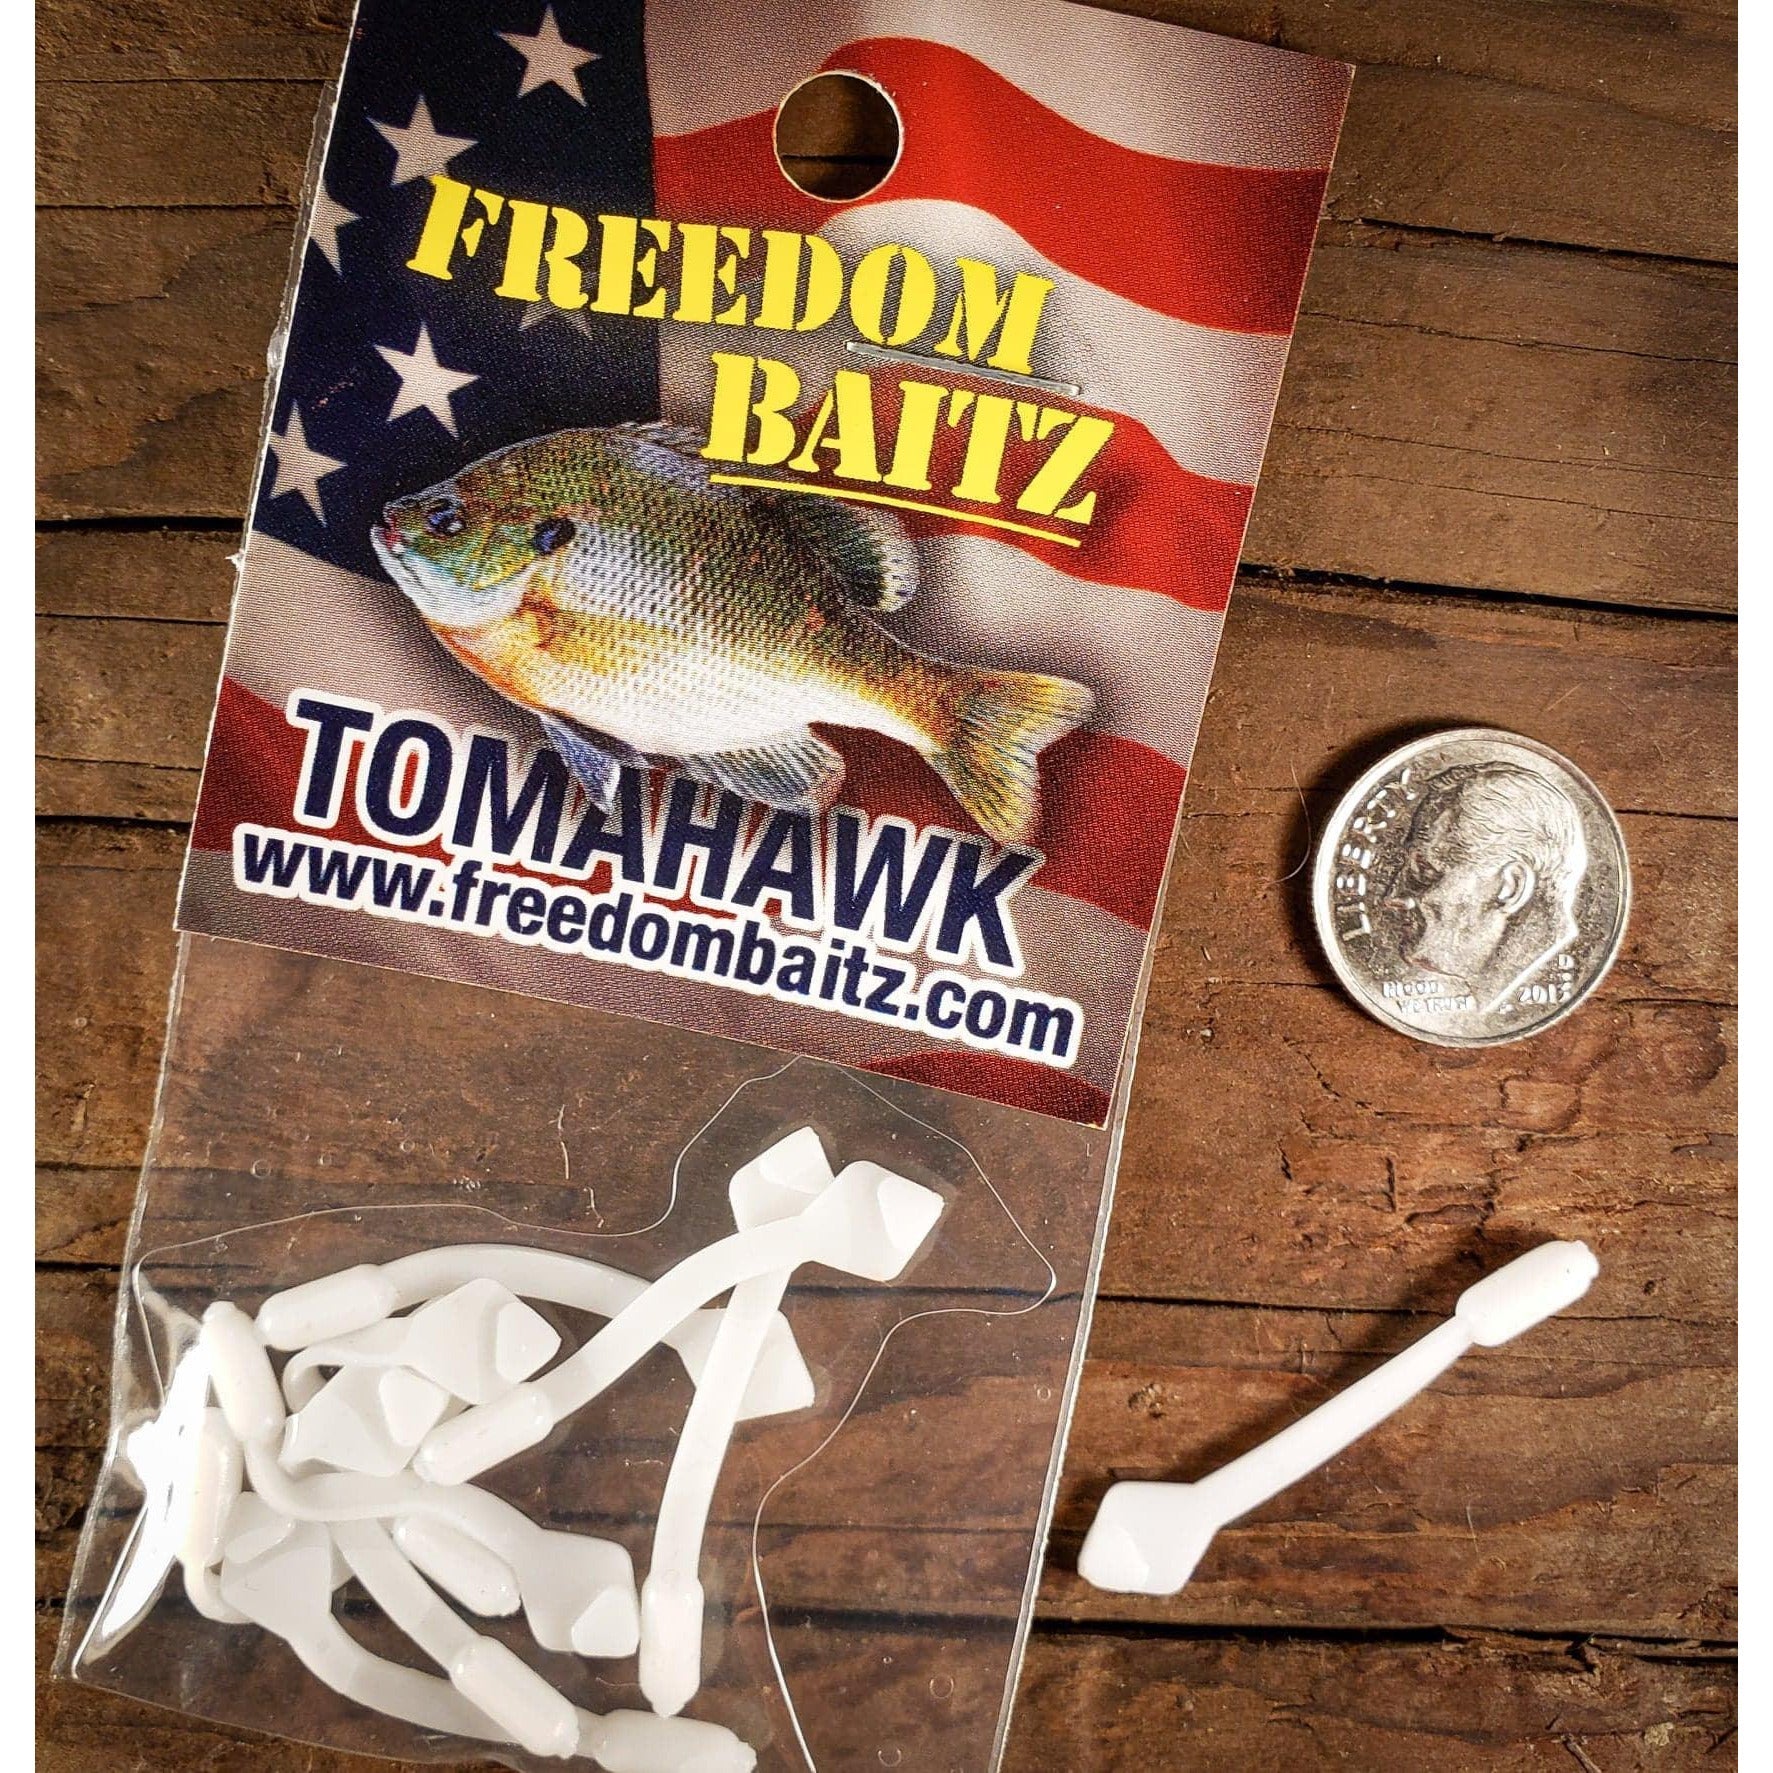 Freedom Baitz, Not just for panfish! Our new 2 Tomahawk has proven itself  as a true multi-species profile with our team catching trout, walleye, and  mo